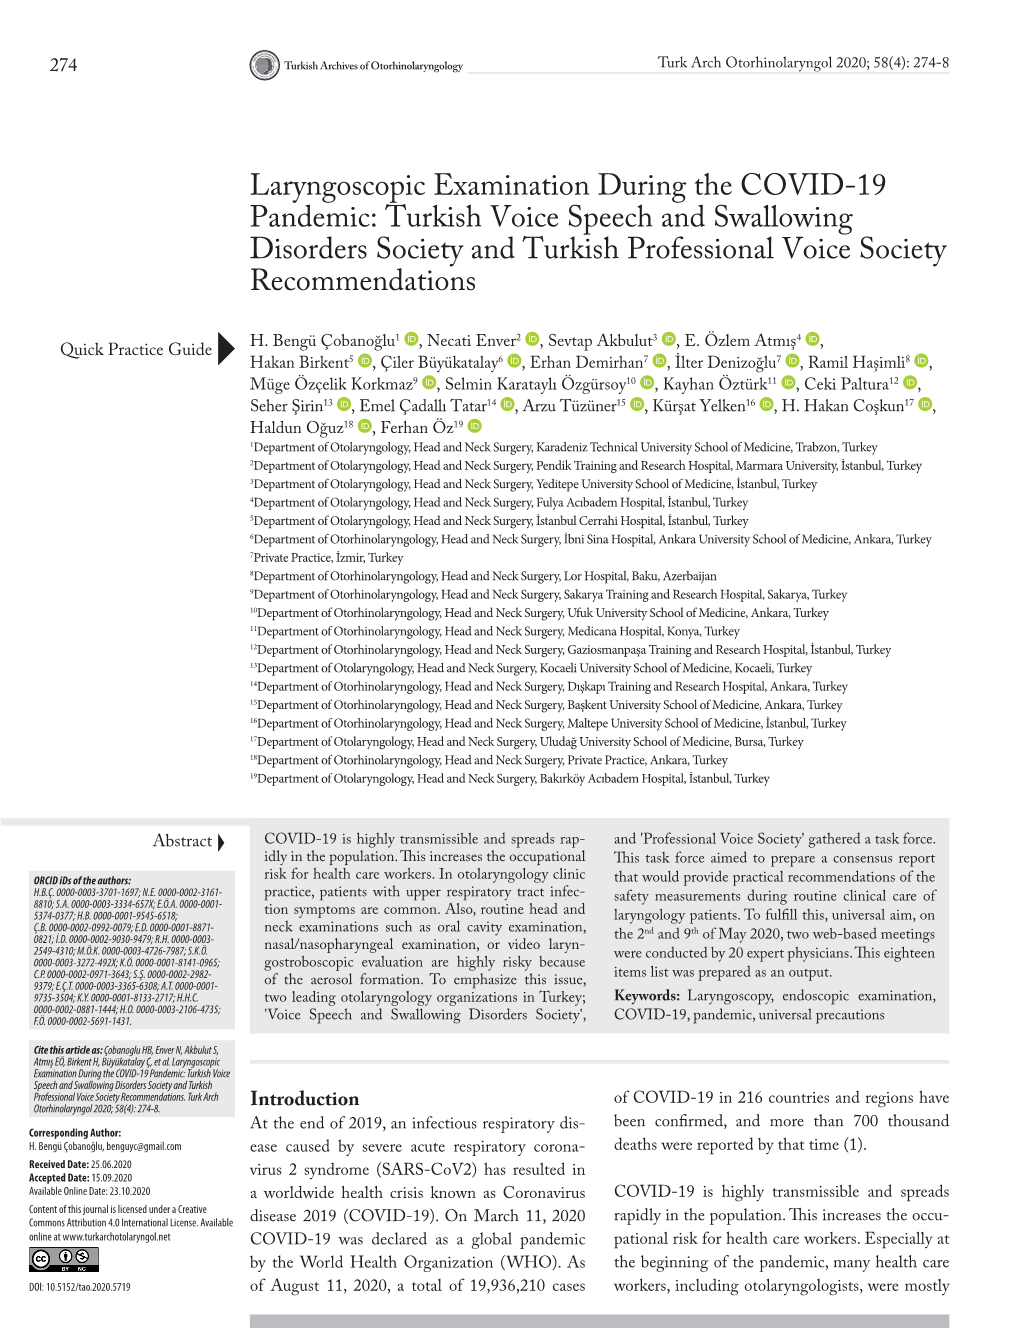 Laryngoscopic Examination During the COVID-19 Pandemic: Turkish Voice Speech and Swallowing Disorders Society and Turkish Professional Voice Society Recommendations